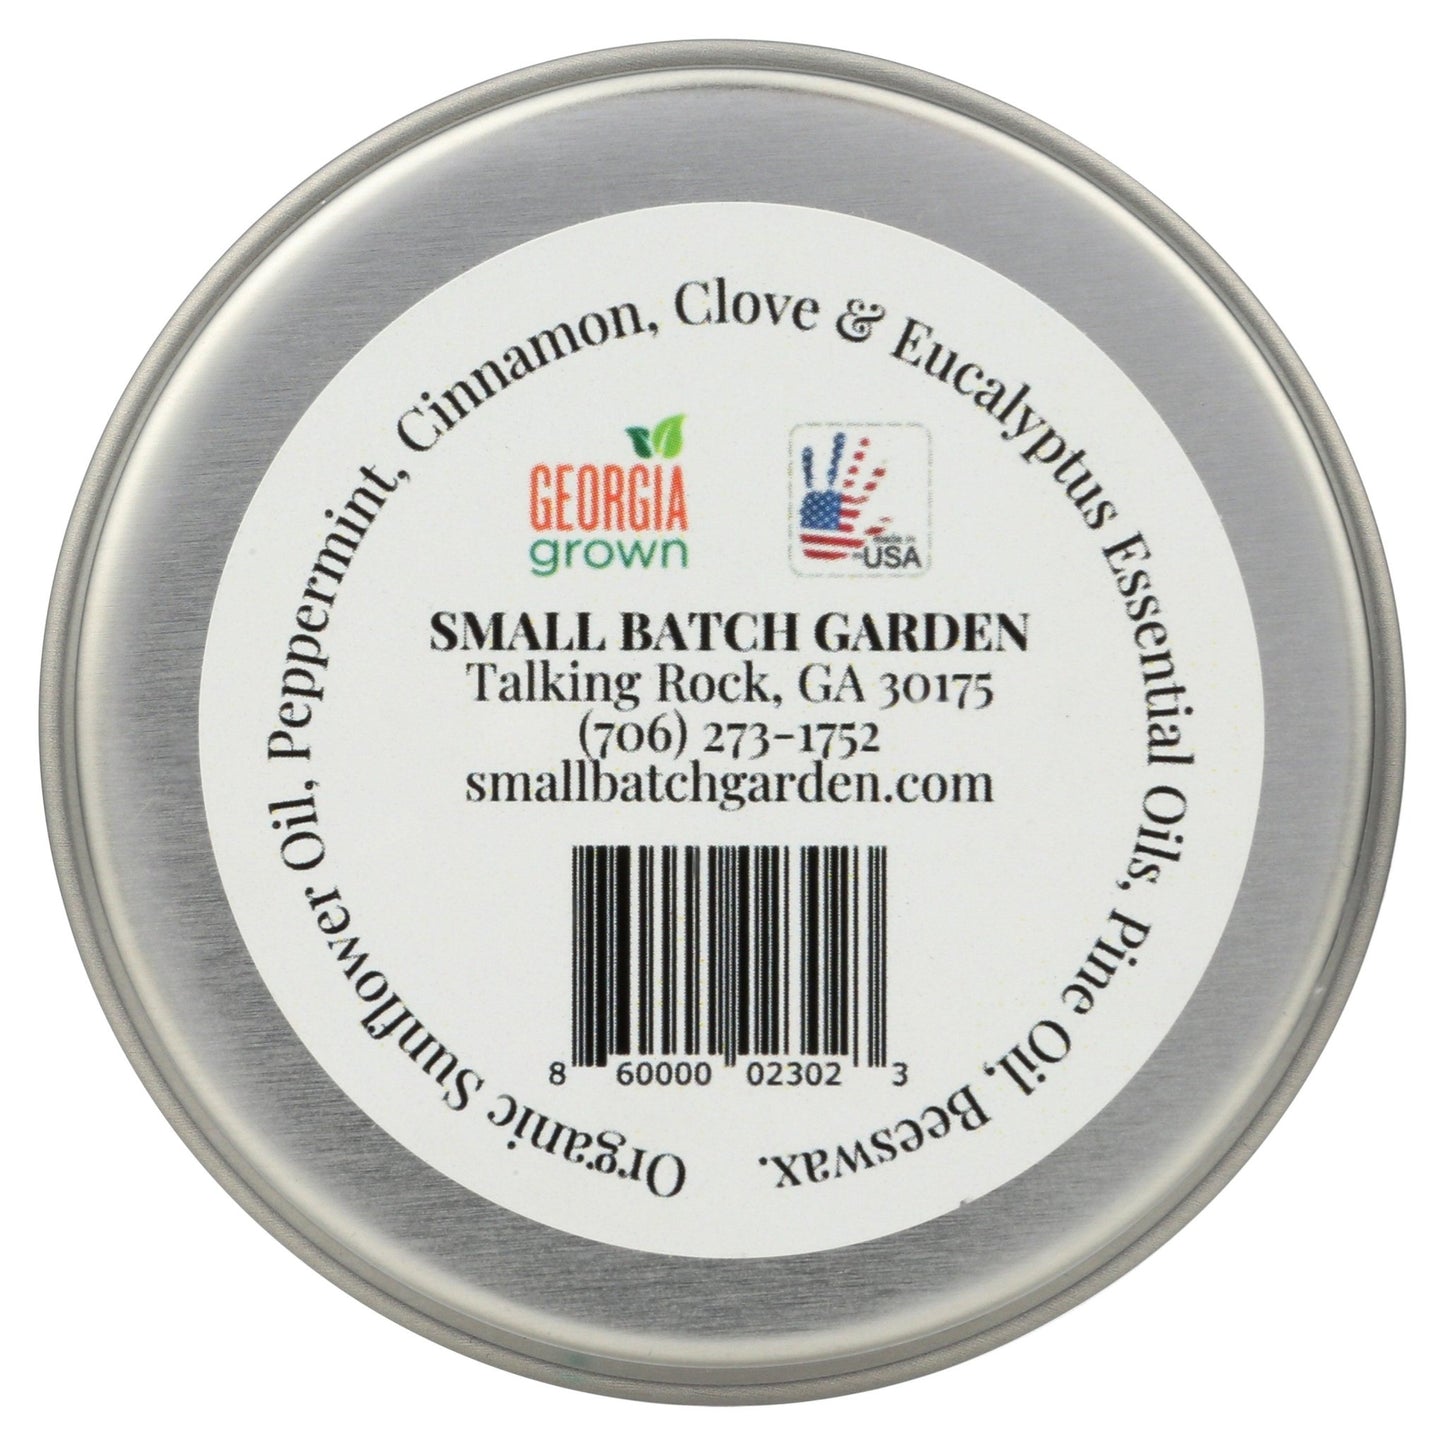 Oh! My Aching...Balm ~ Natural Herbal Chest and Muscle Rub ~ Relief from Sinus Congestion, Aches & Pains - Small Batch Garden